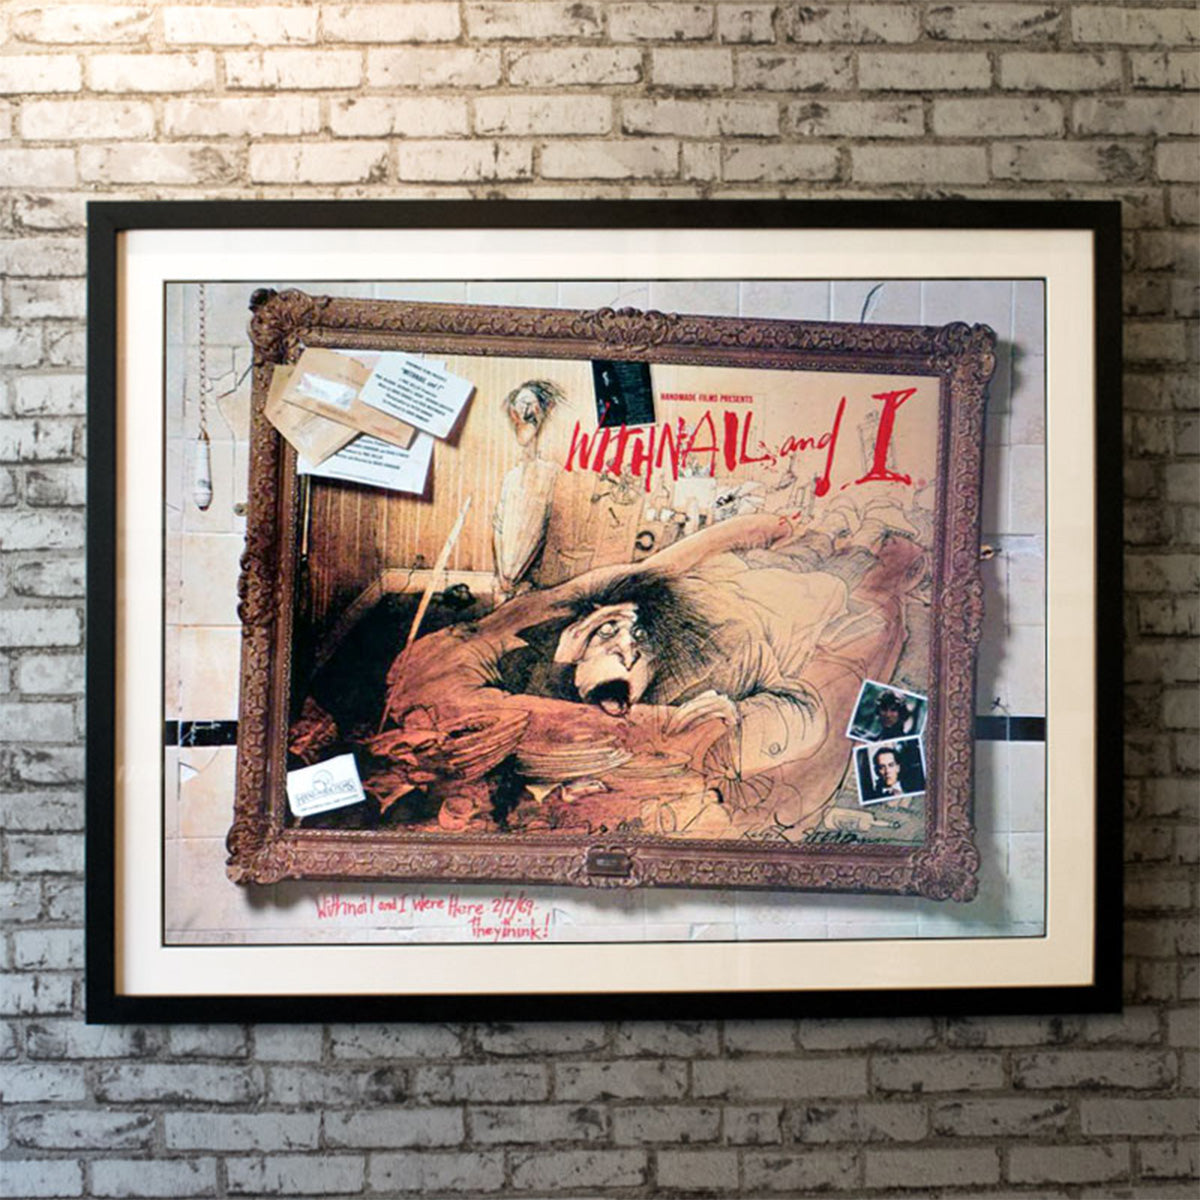 Original Movie Poster of Withnail & I (1987)